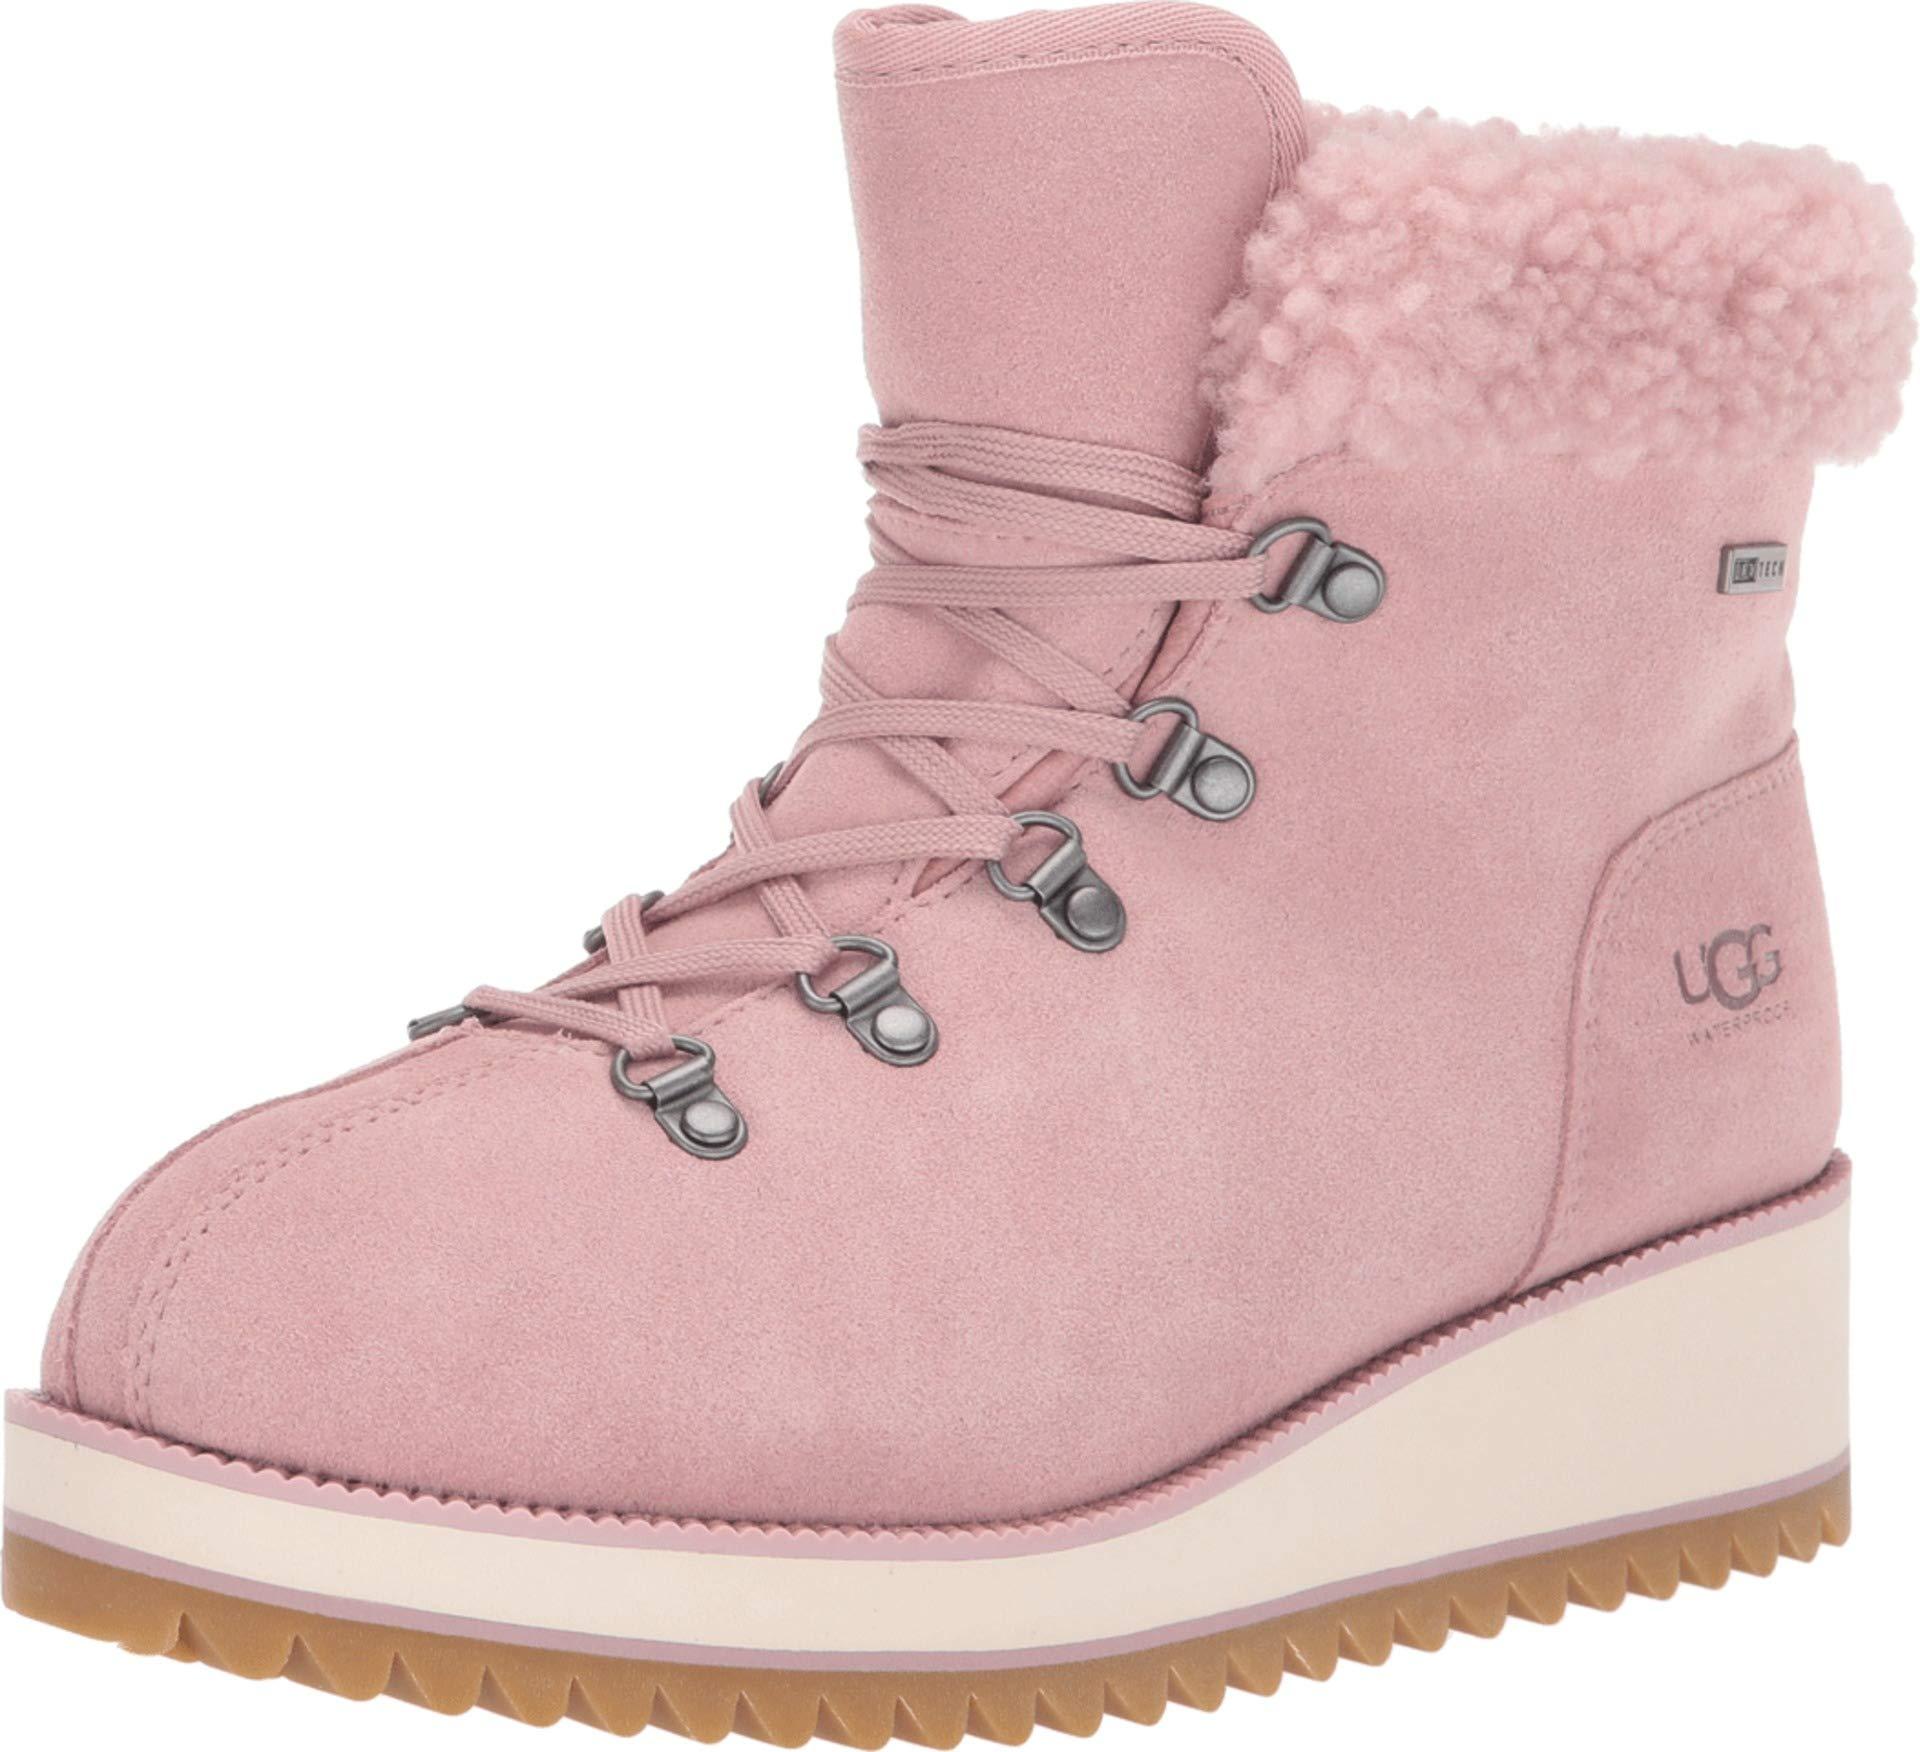 Pink Ugg Boots With Laces Greece, SAVE 60% - primera-ap.com